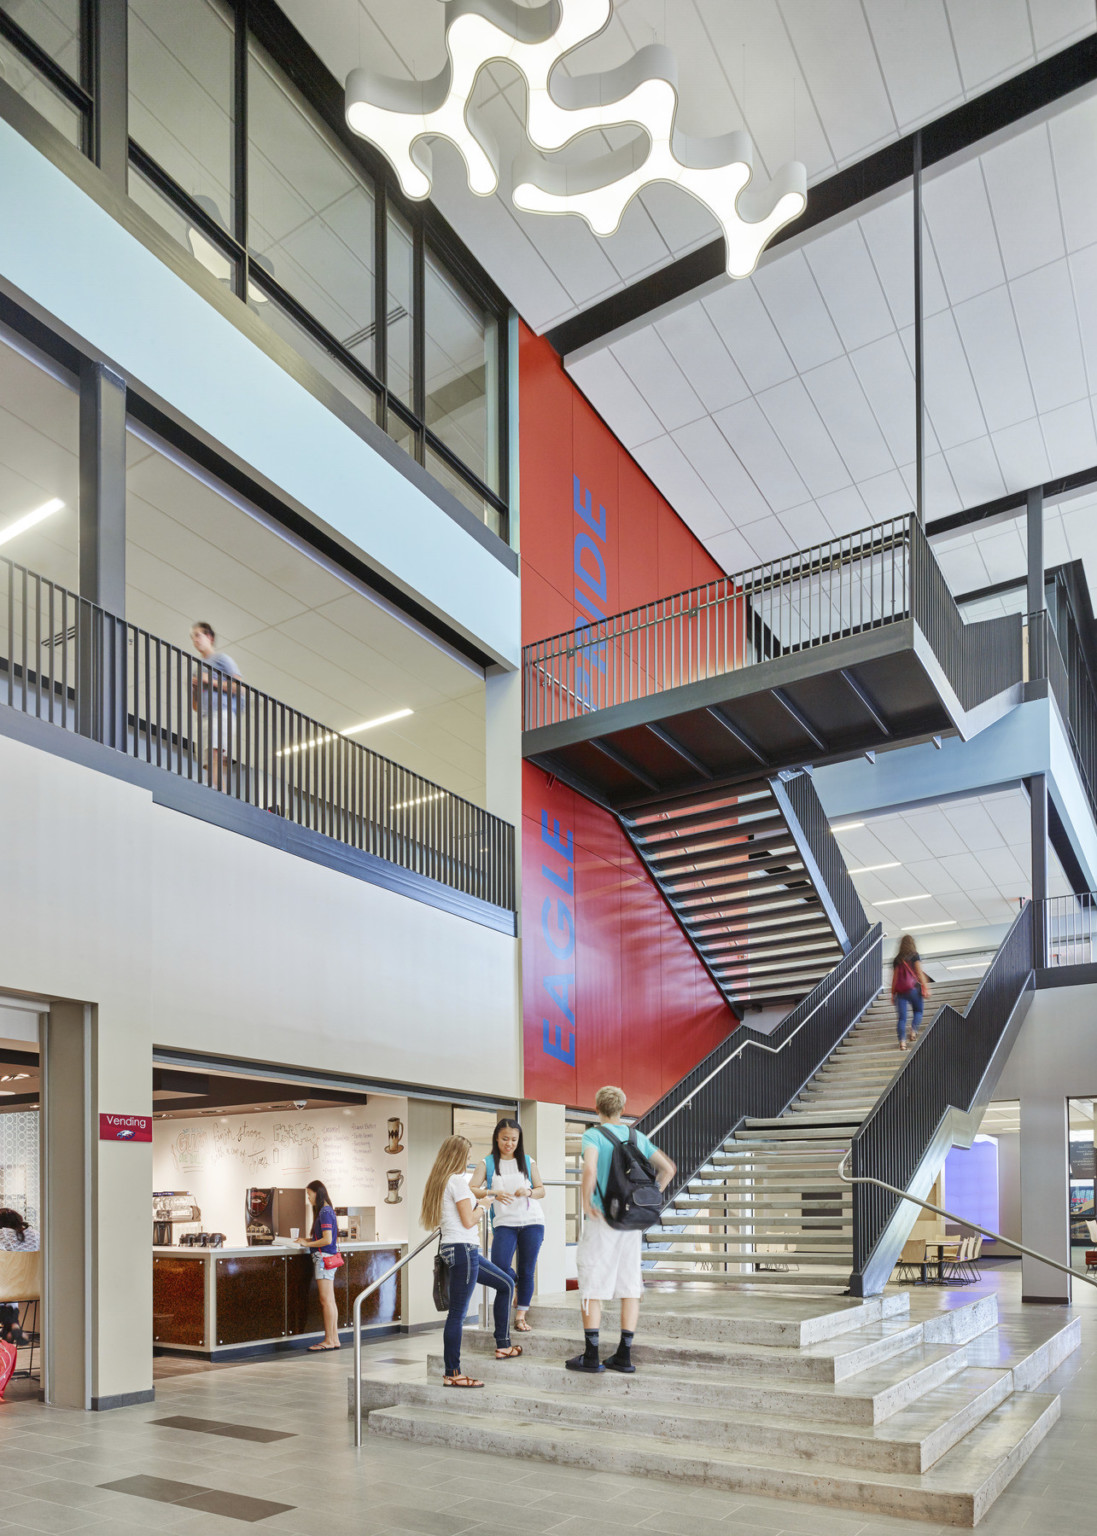 Wood floating stairs with black railing in white 3 story atrium. Orange accent mural to left of stairs reads Eagle Pride